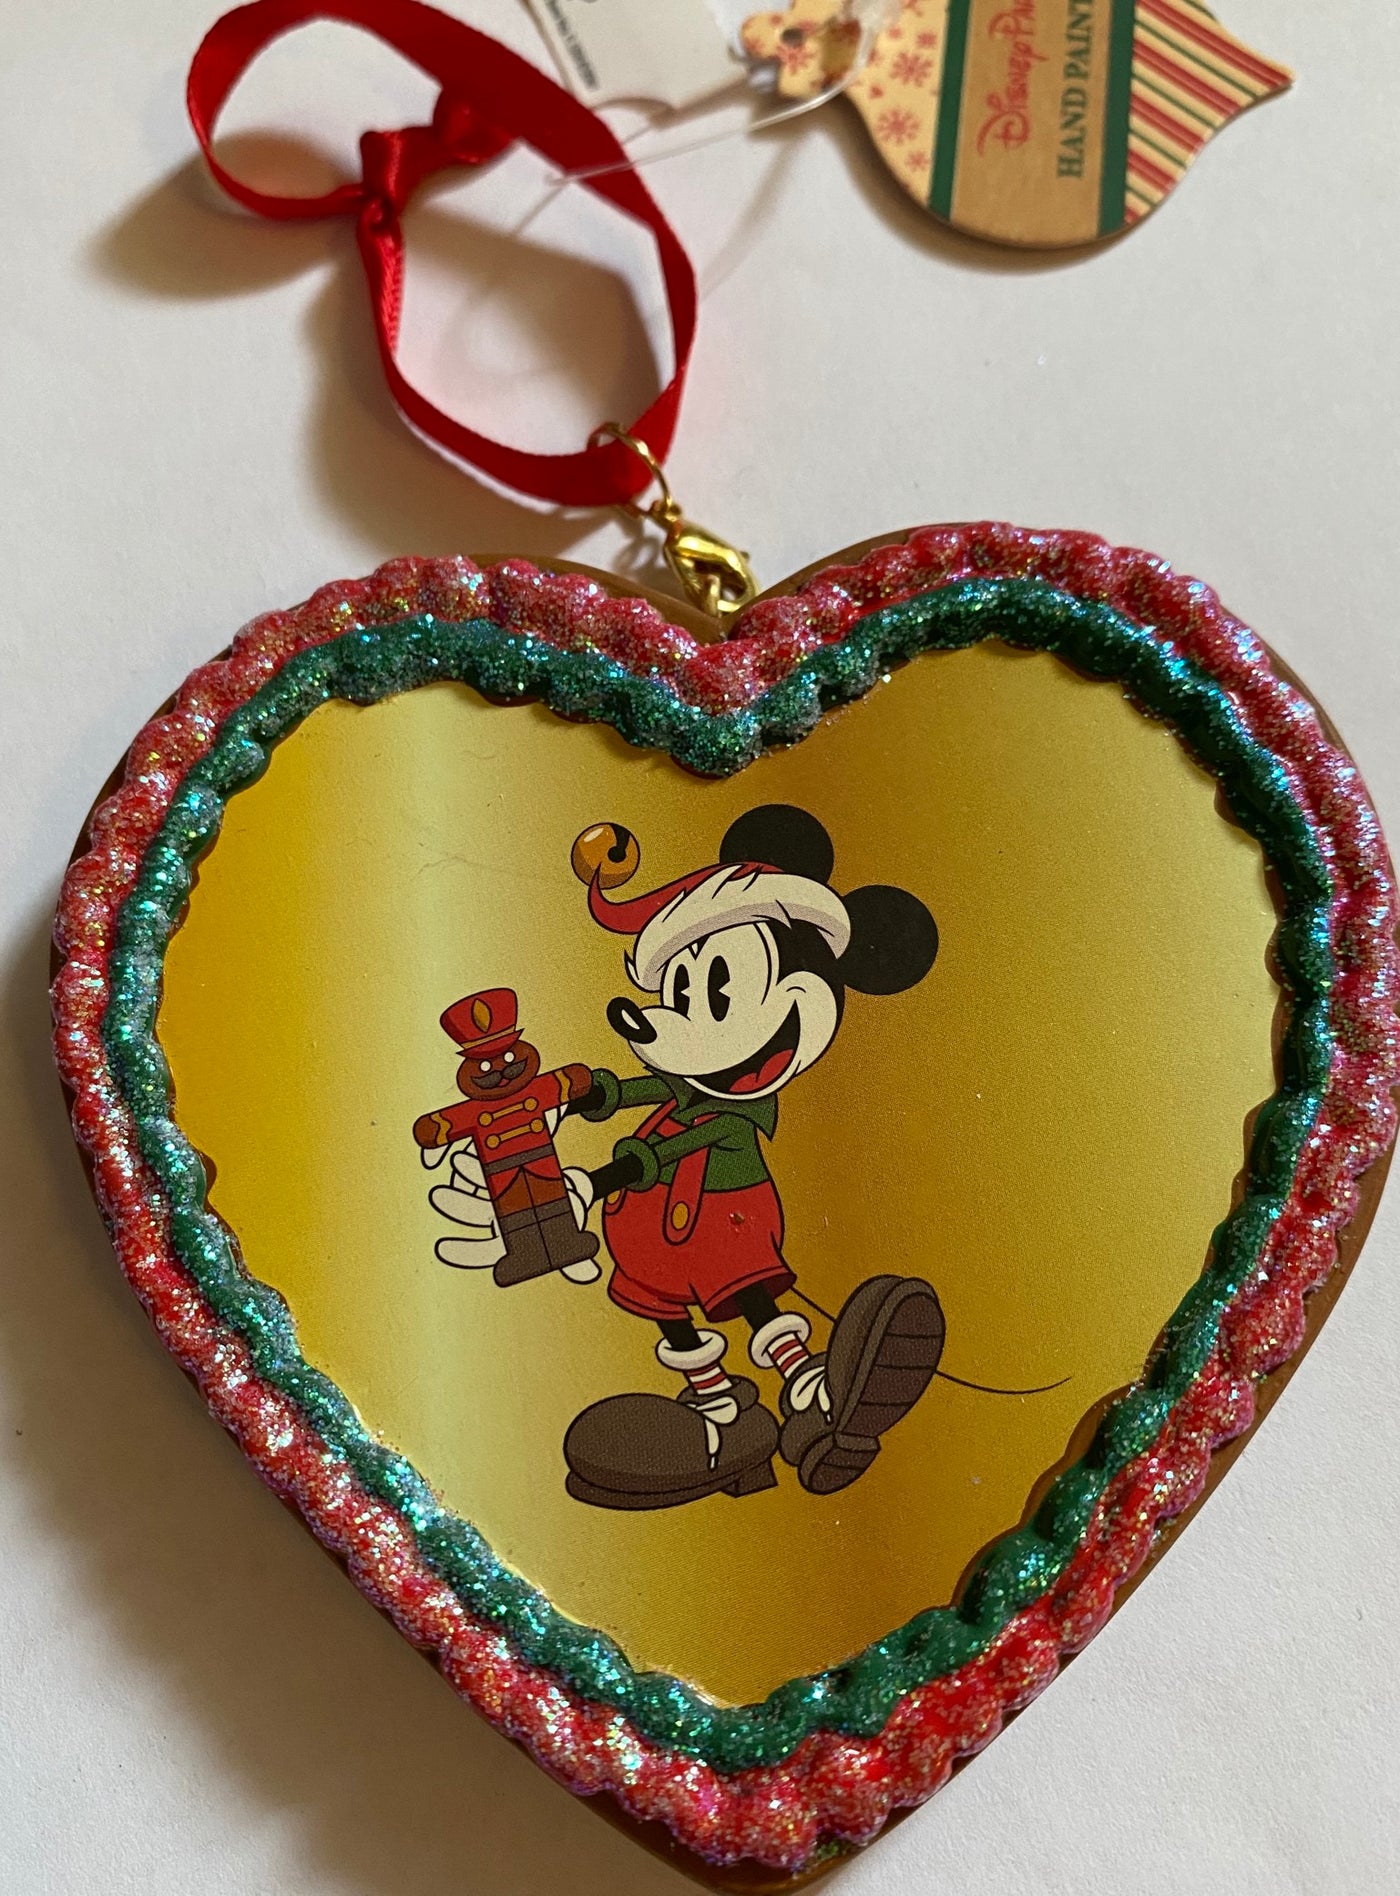 Disney Parks Epcot Germany Mickey Frohes Fest Christmas Ornament New With Tags